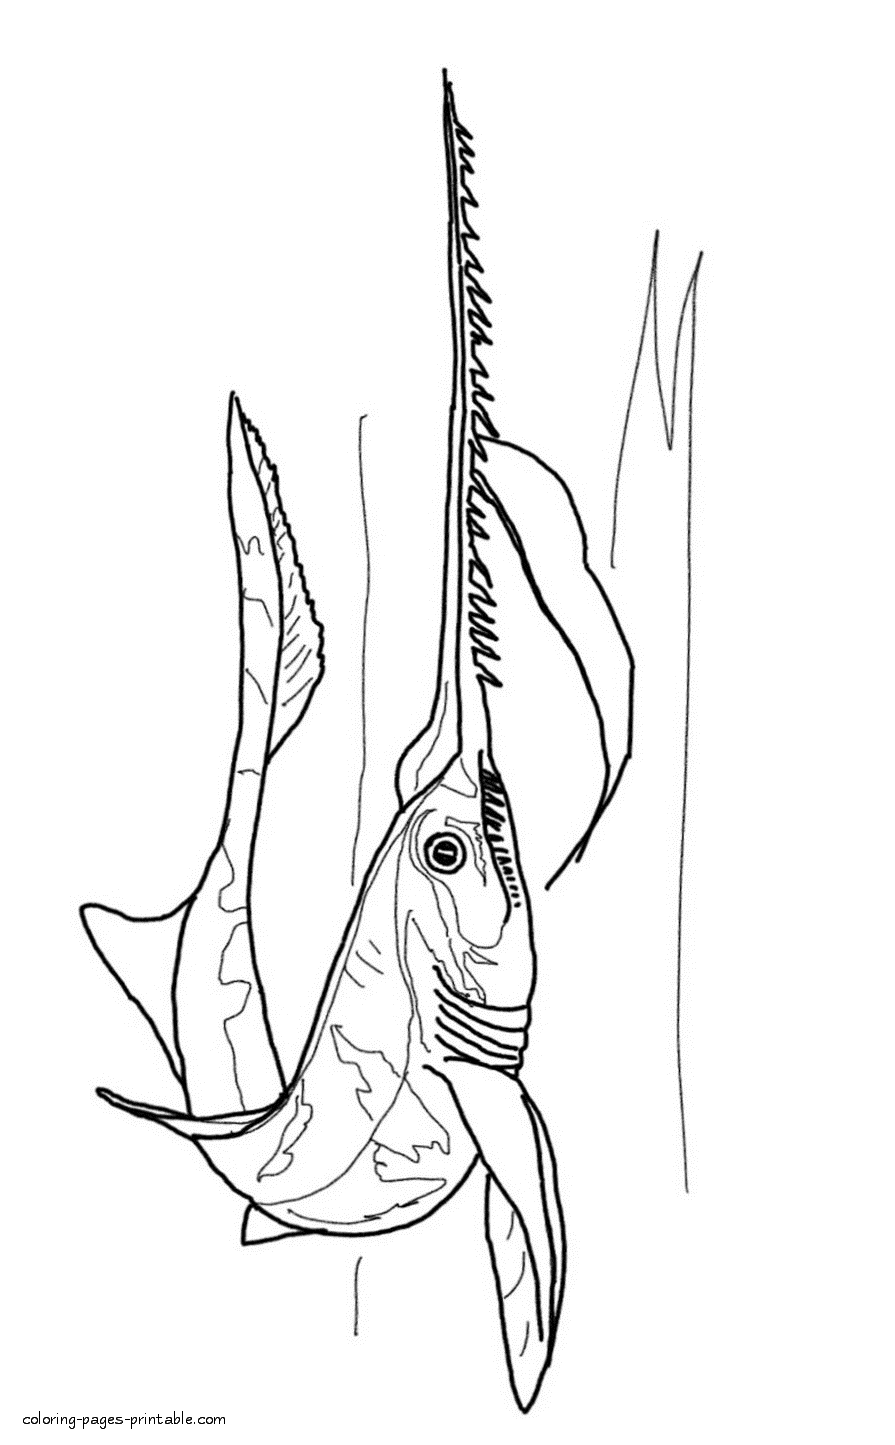 Coloring page of the sea life. Sharks